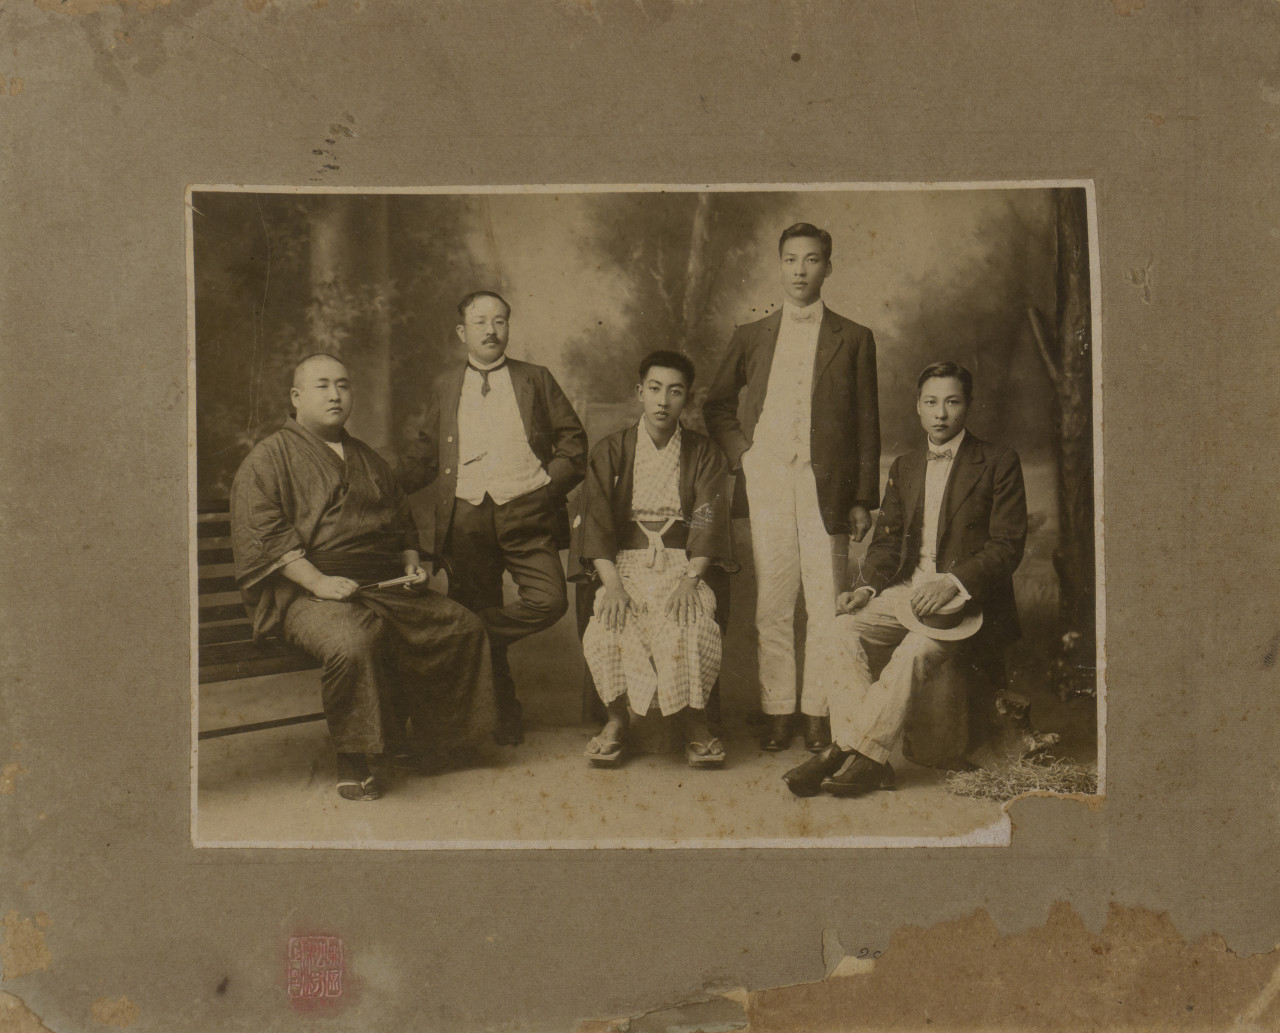 Japanese men pose for the camera during the pre-war period. – Picture courtesy of Ilham Gallery, November 8, 2020